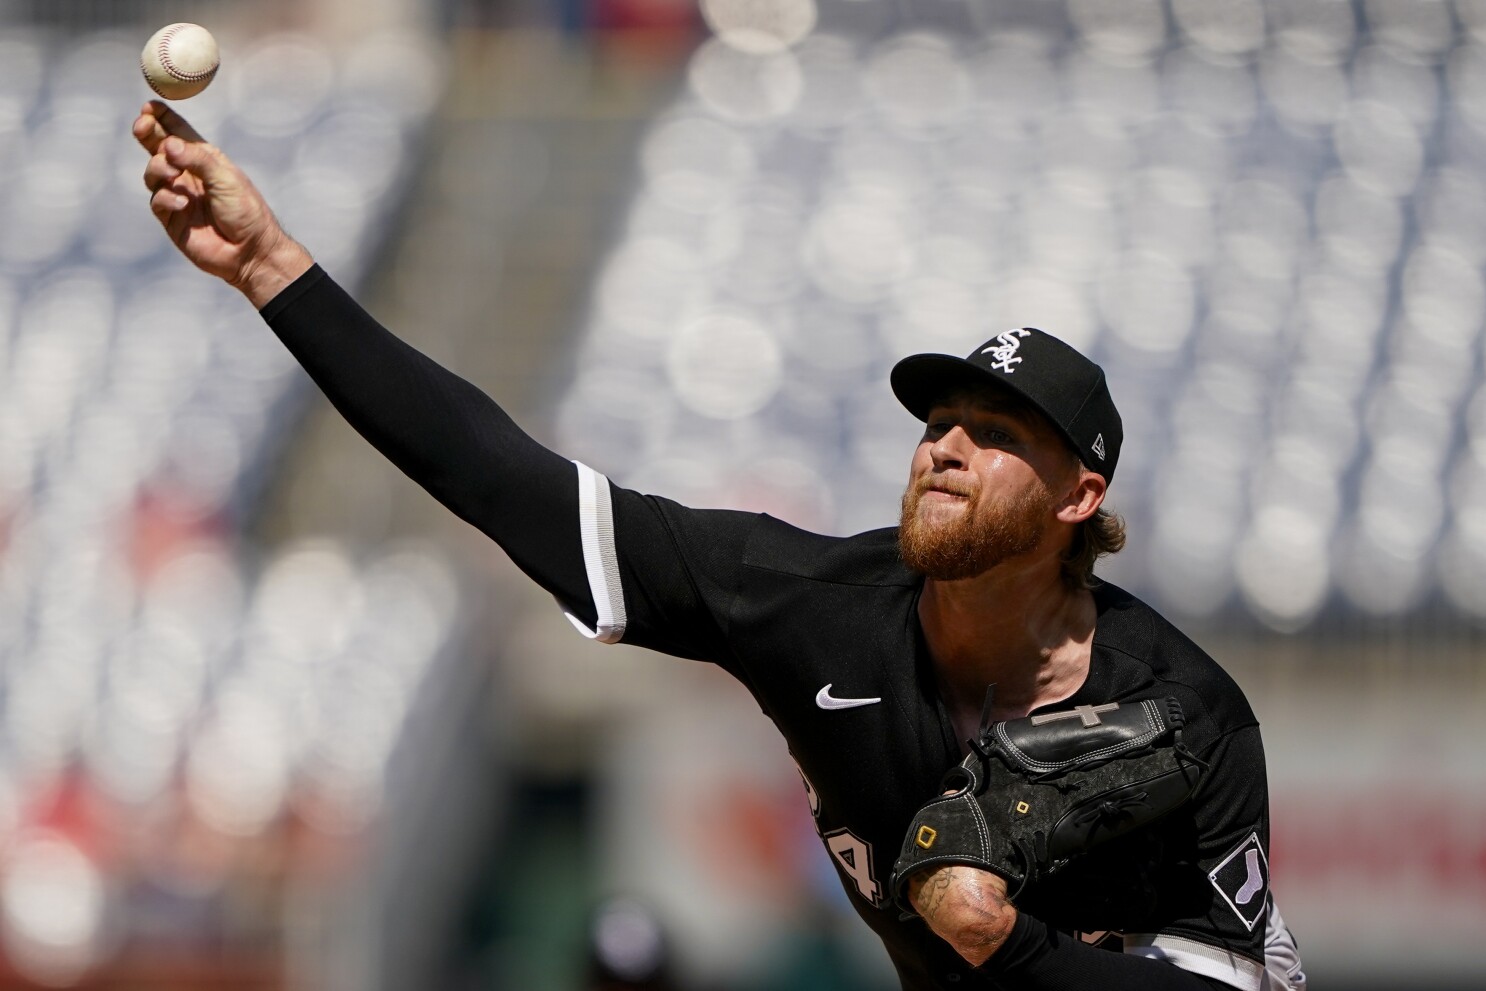 White Sox News: Colas finally called back up, Kopech is injured